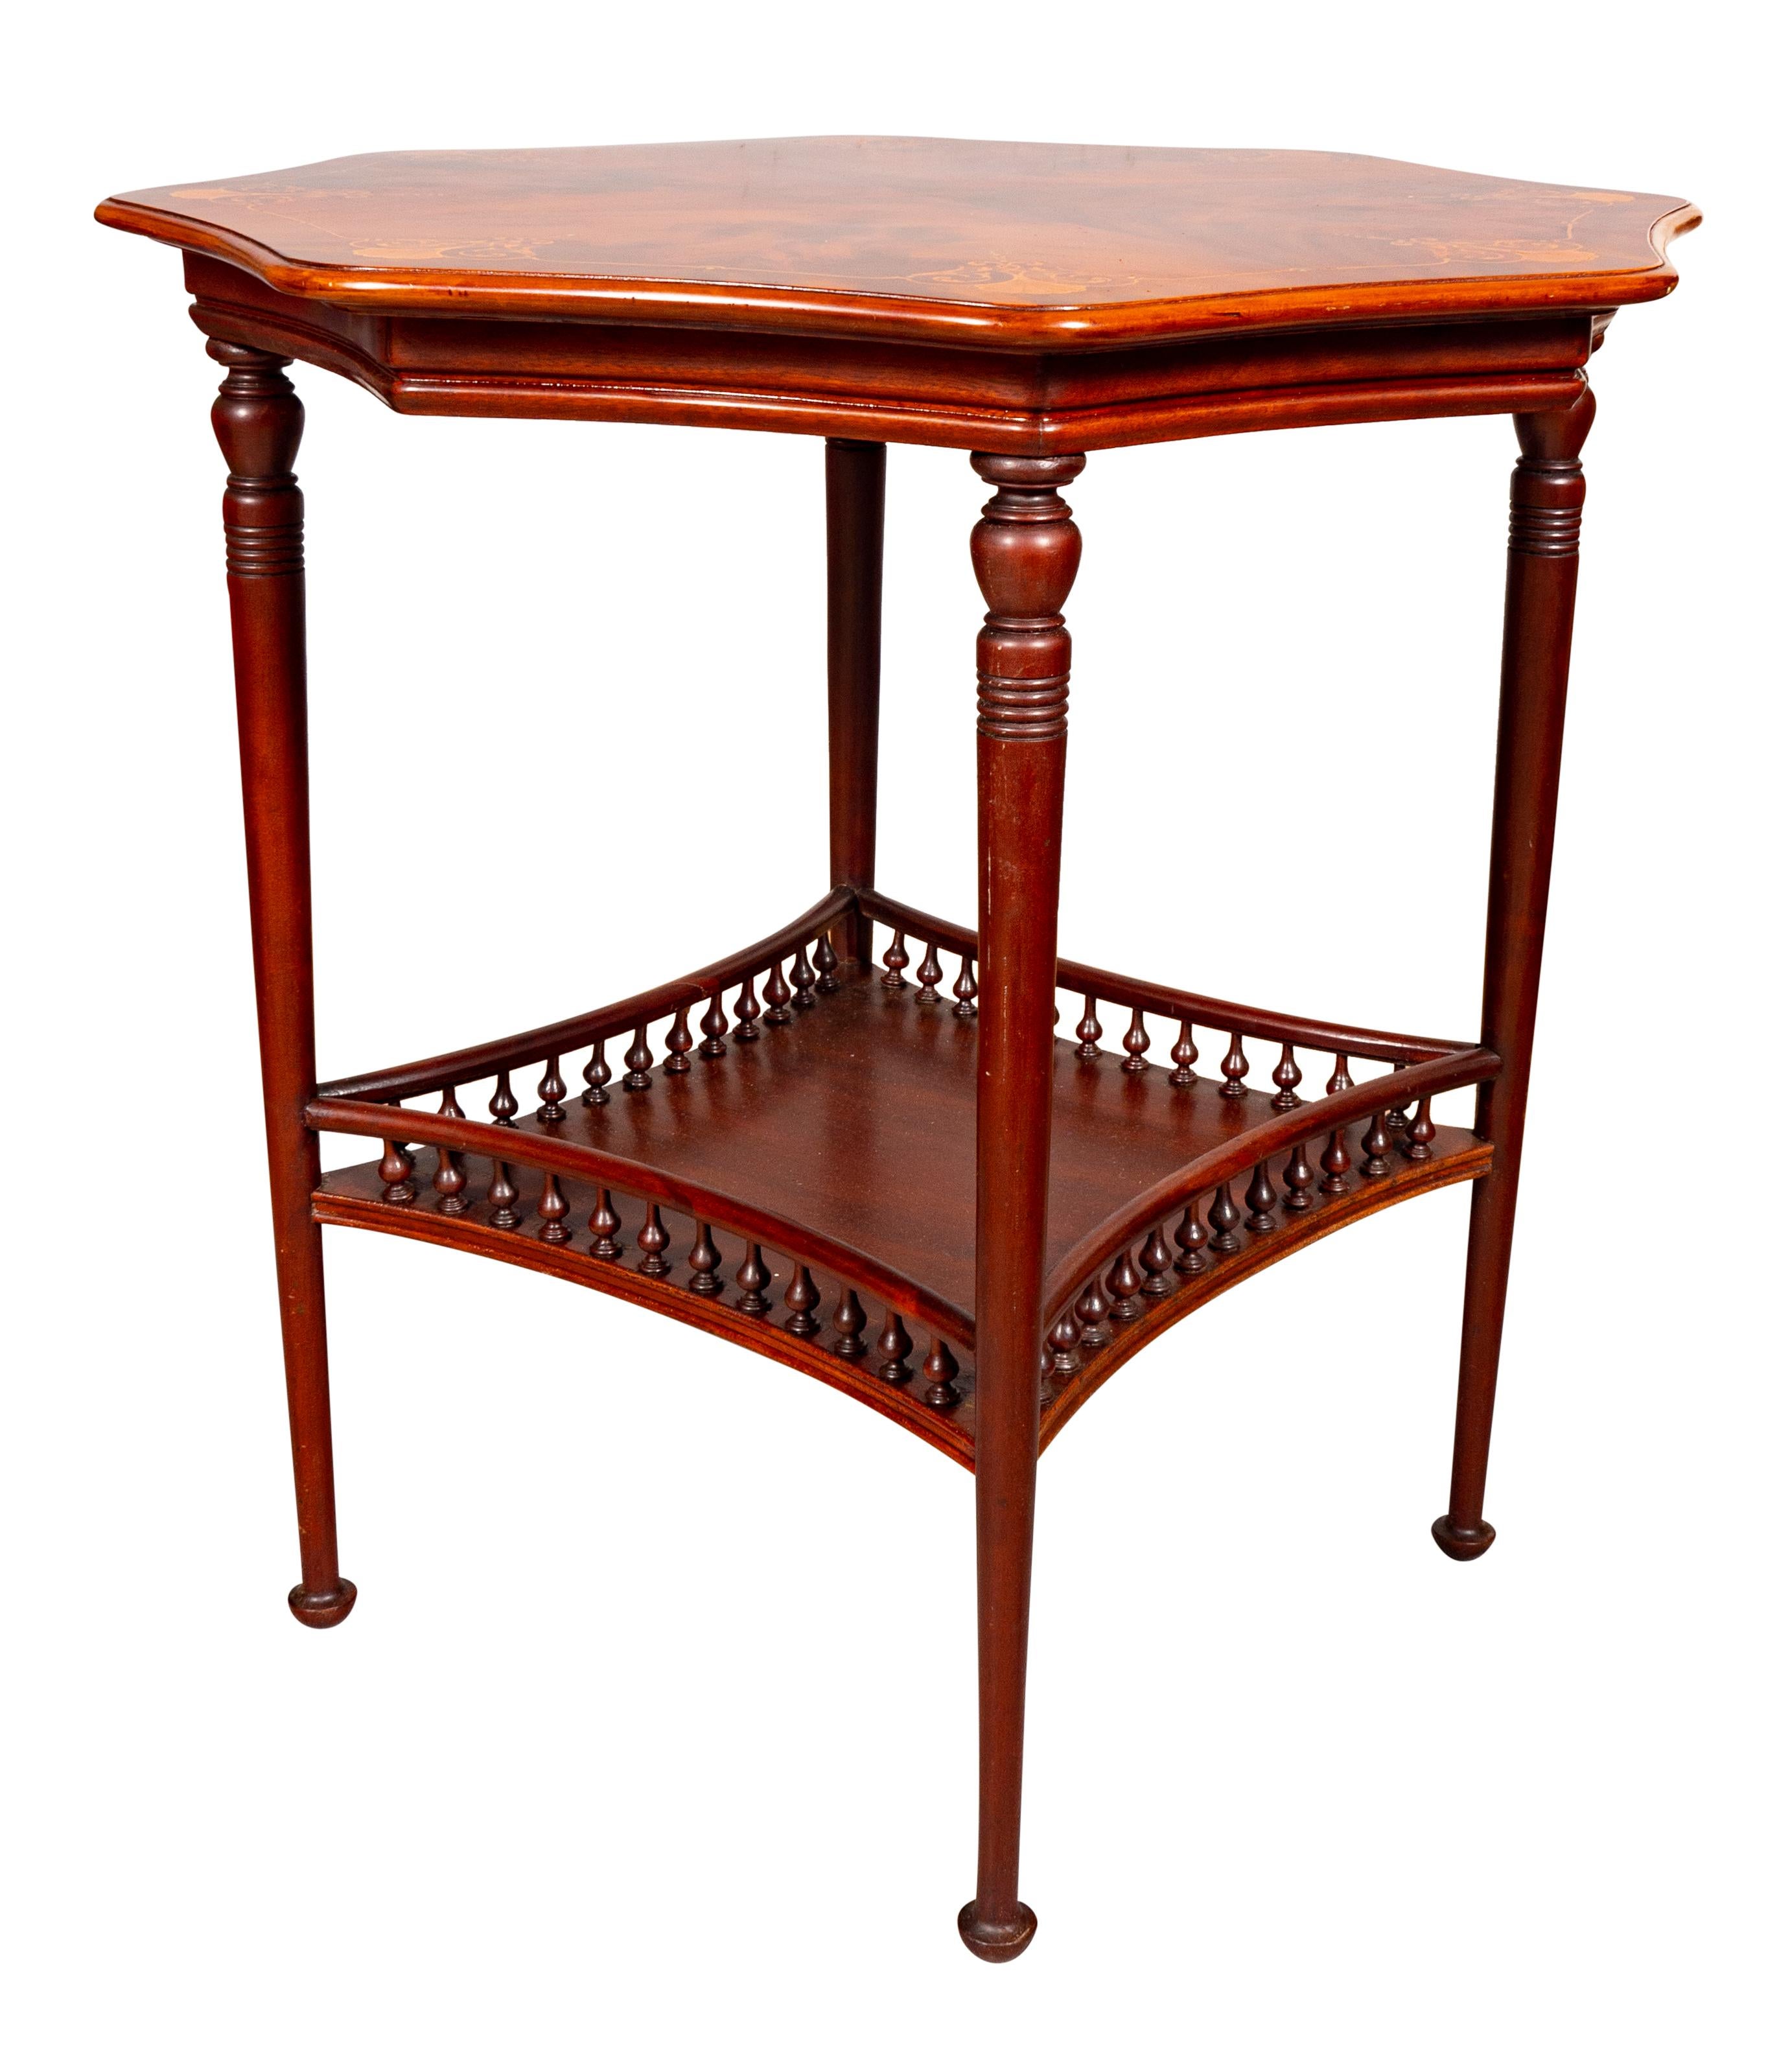 Late 19th Century American Aesthetic Mahogany and Inlaid Table For Sale